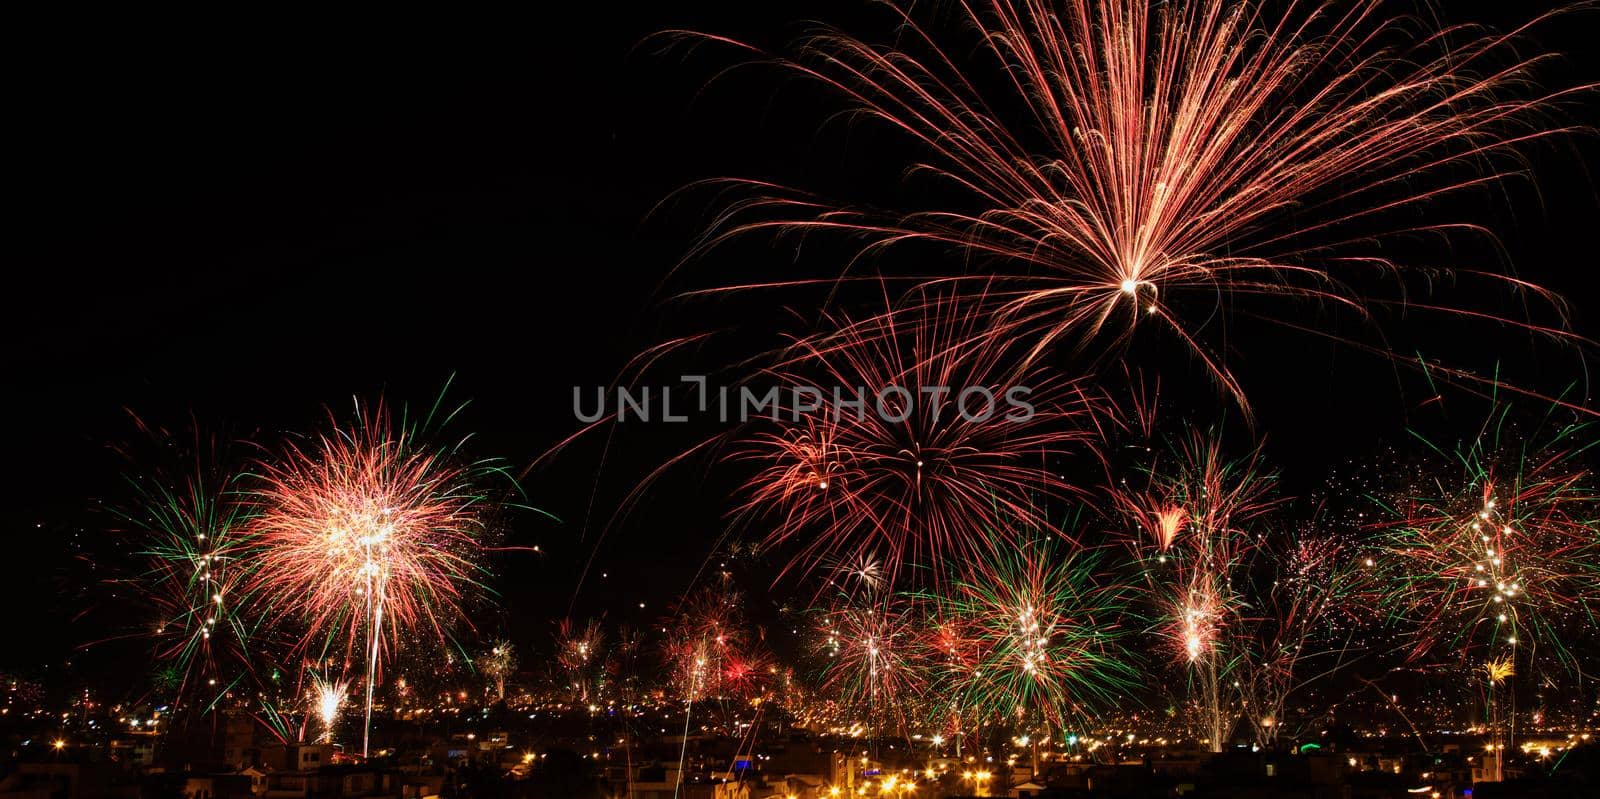 New year's eve fireworks in the city of Arequipa, Peru by wondry